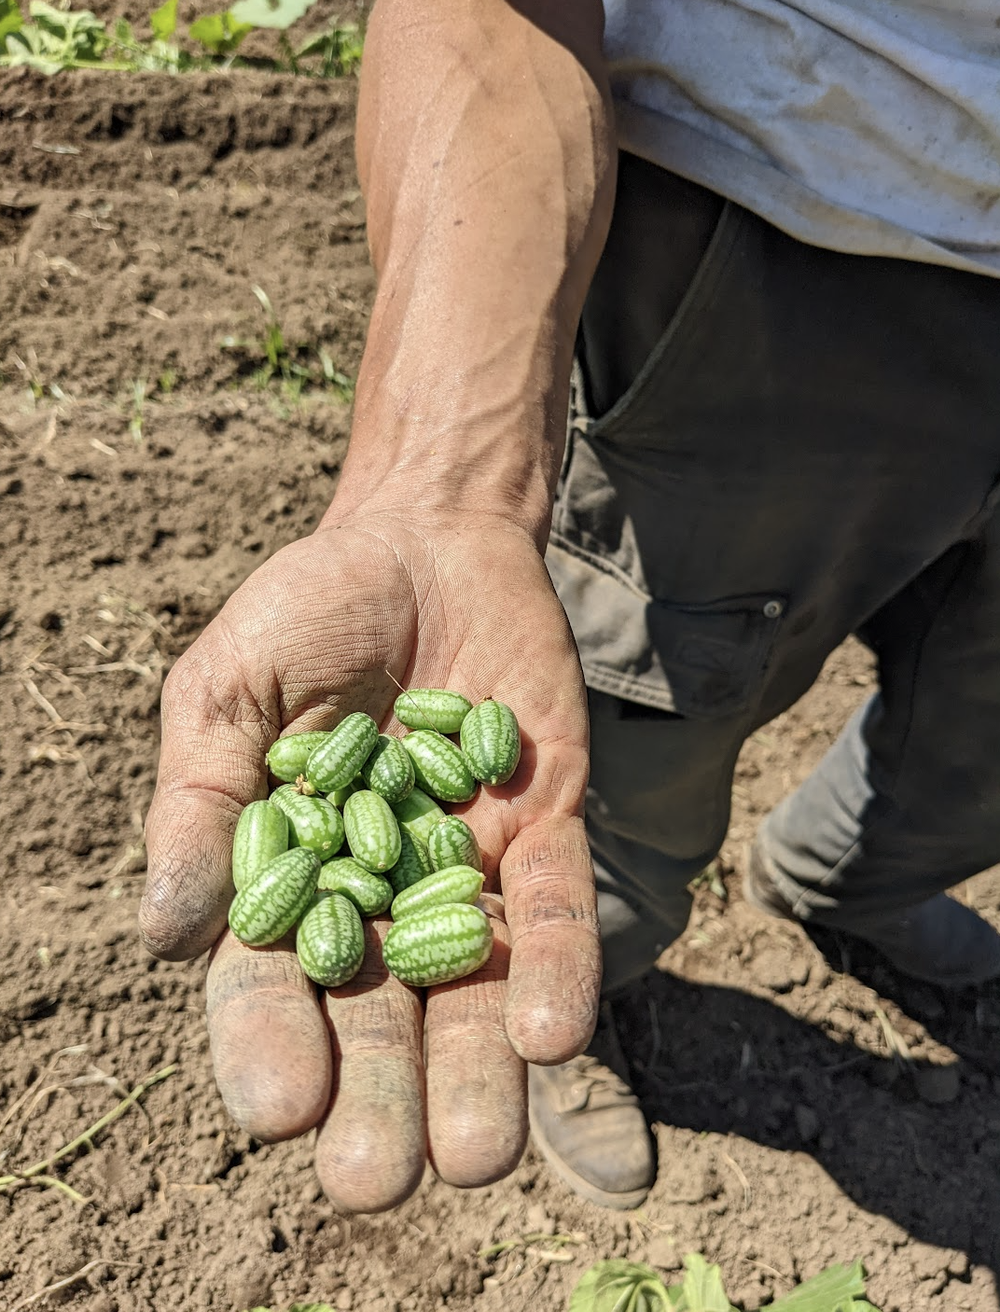 Cucamelons!